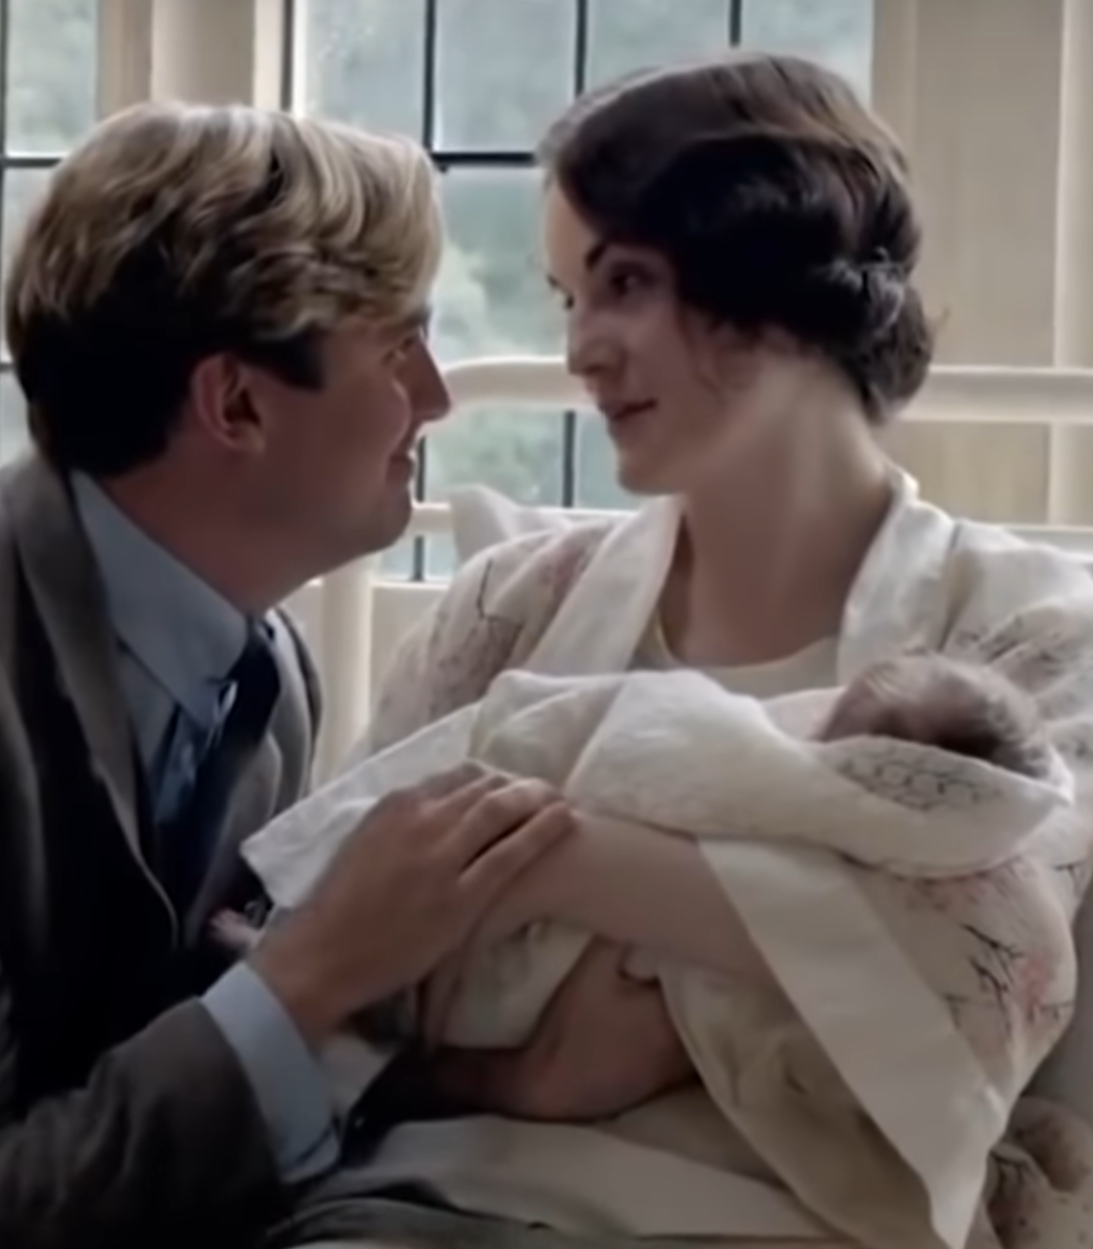 Mary Matthew looking at each other while she holds a baby in Downton Abbey